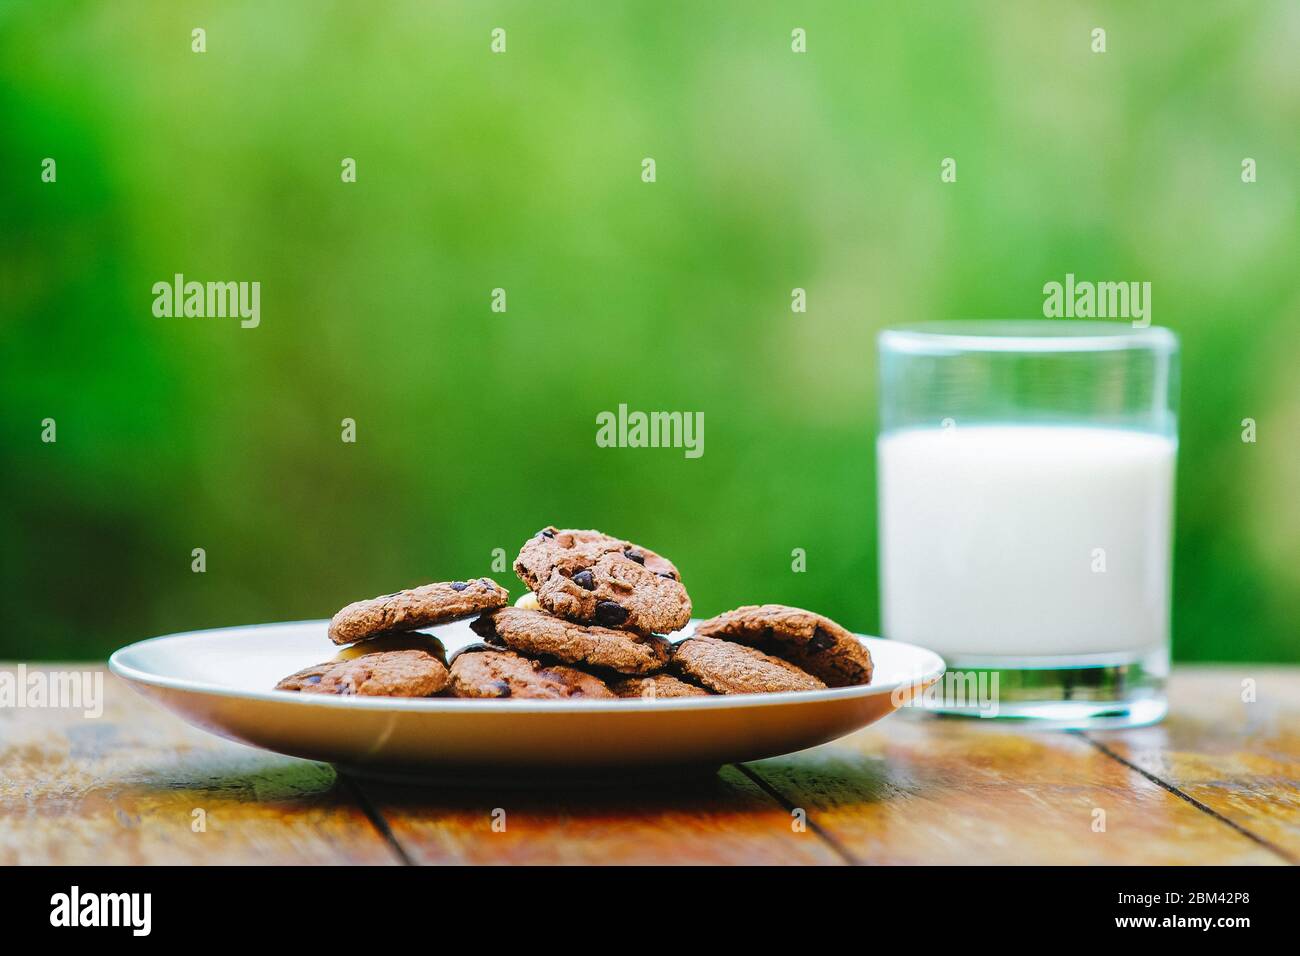 A glass of milk on green background. Glass Stock Photo